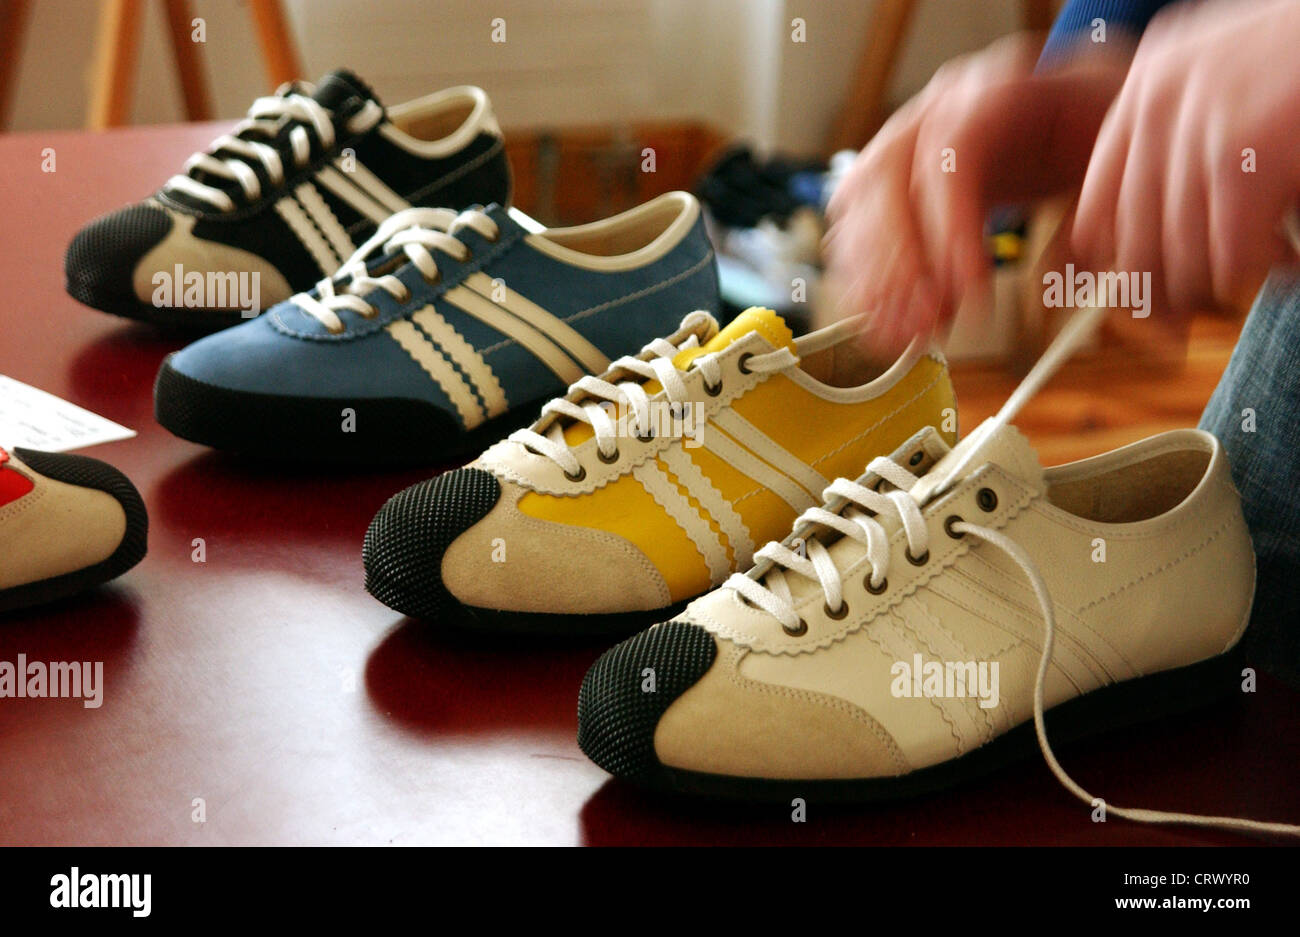 New sneakers of the former East German brand Zeha Stock Photo - Alamy